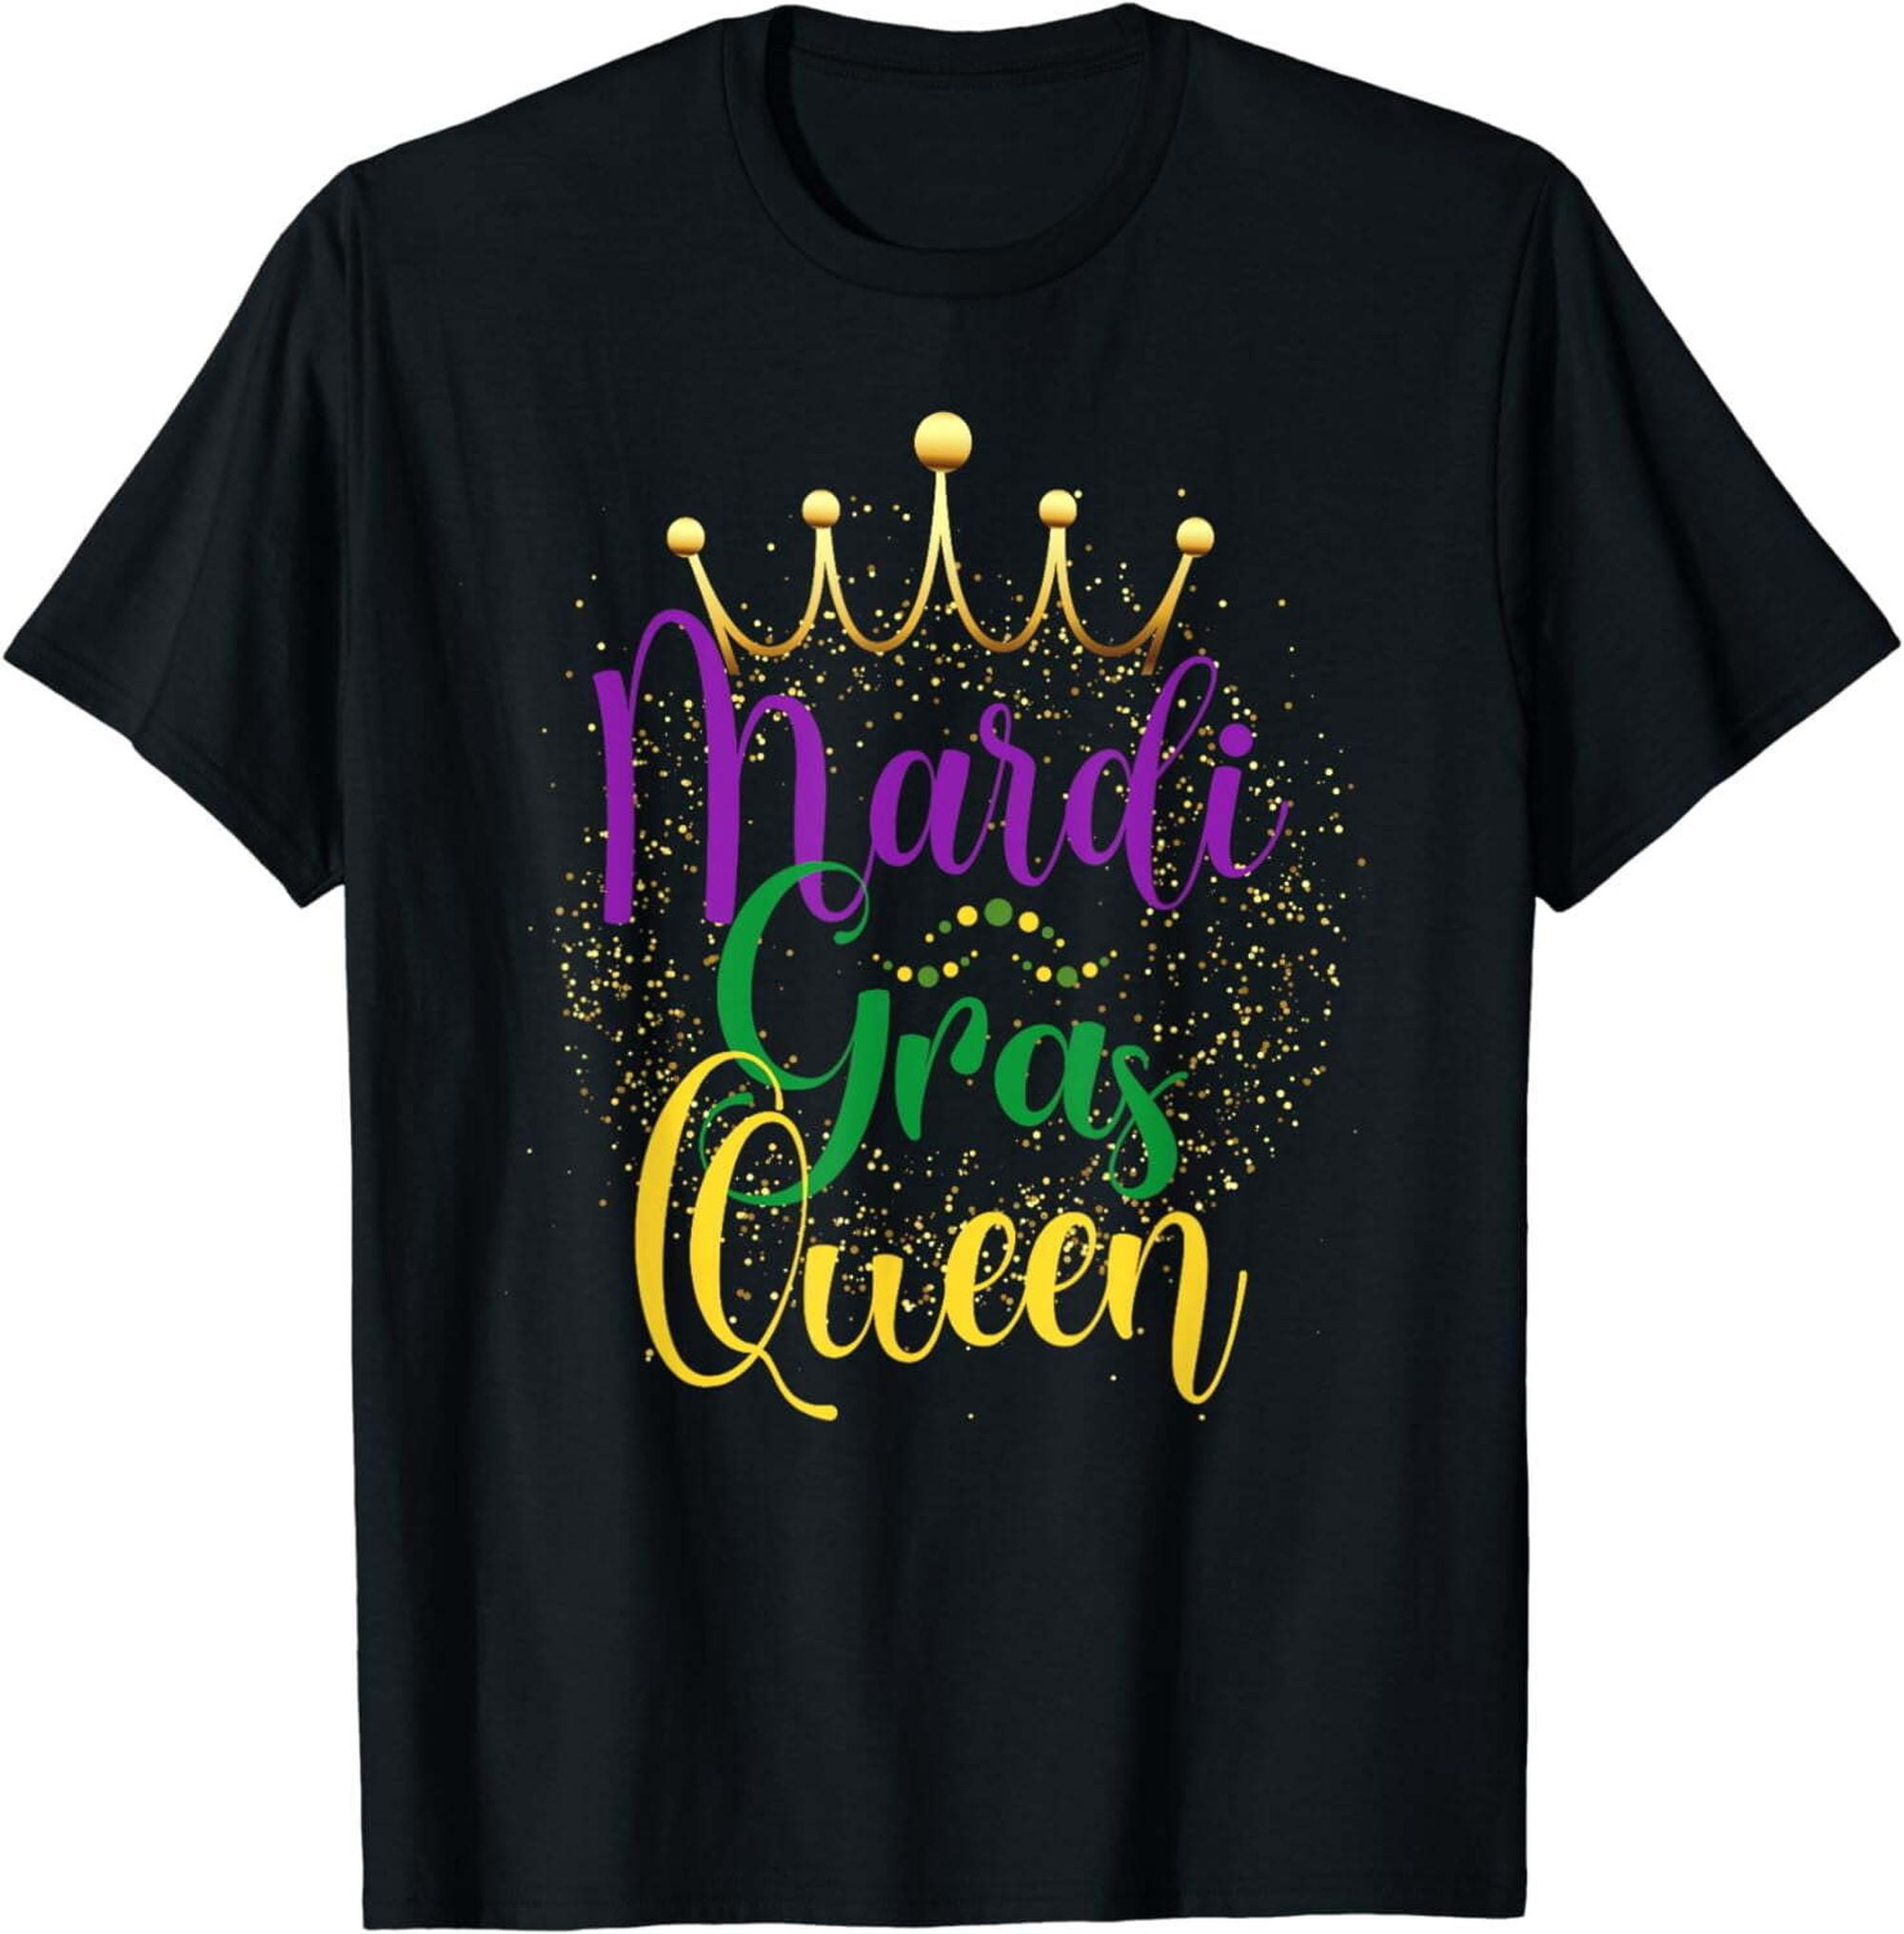 Show Your Inner Royalty with Our Mardi Gras Queen Tee - A Fashionable ...